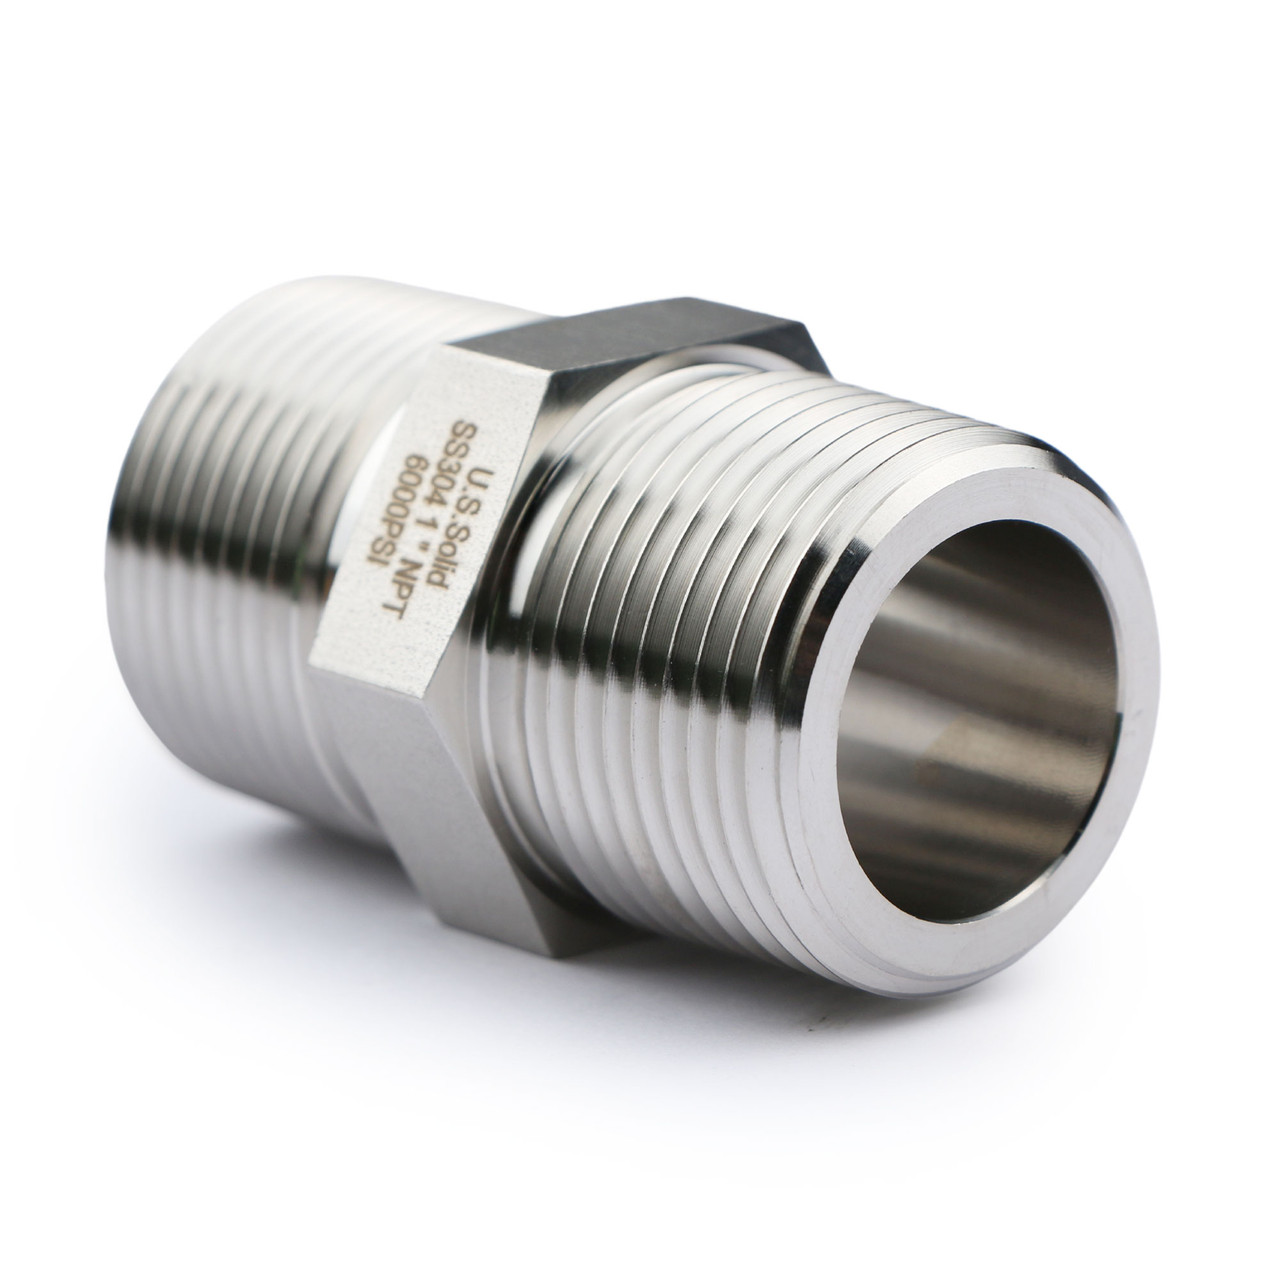 High Pressure 6000Psi Female Thread Elbow - 90 Degree Stainless